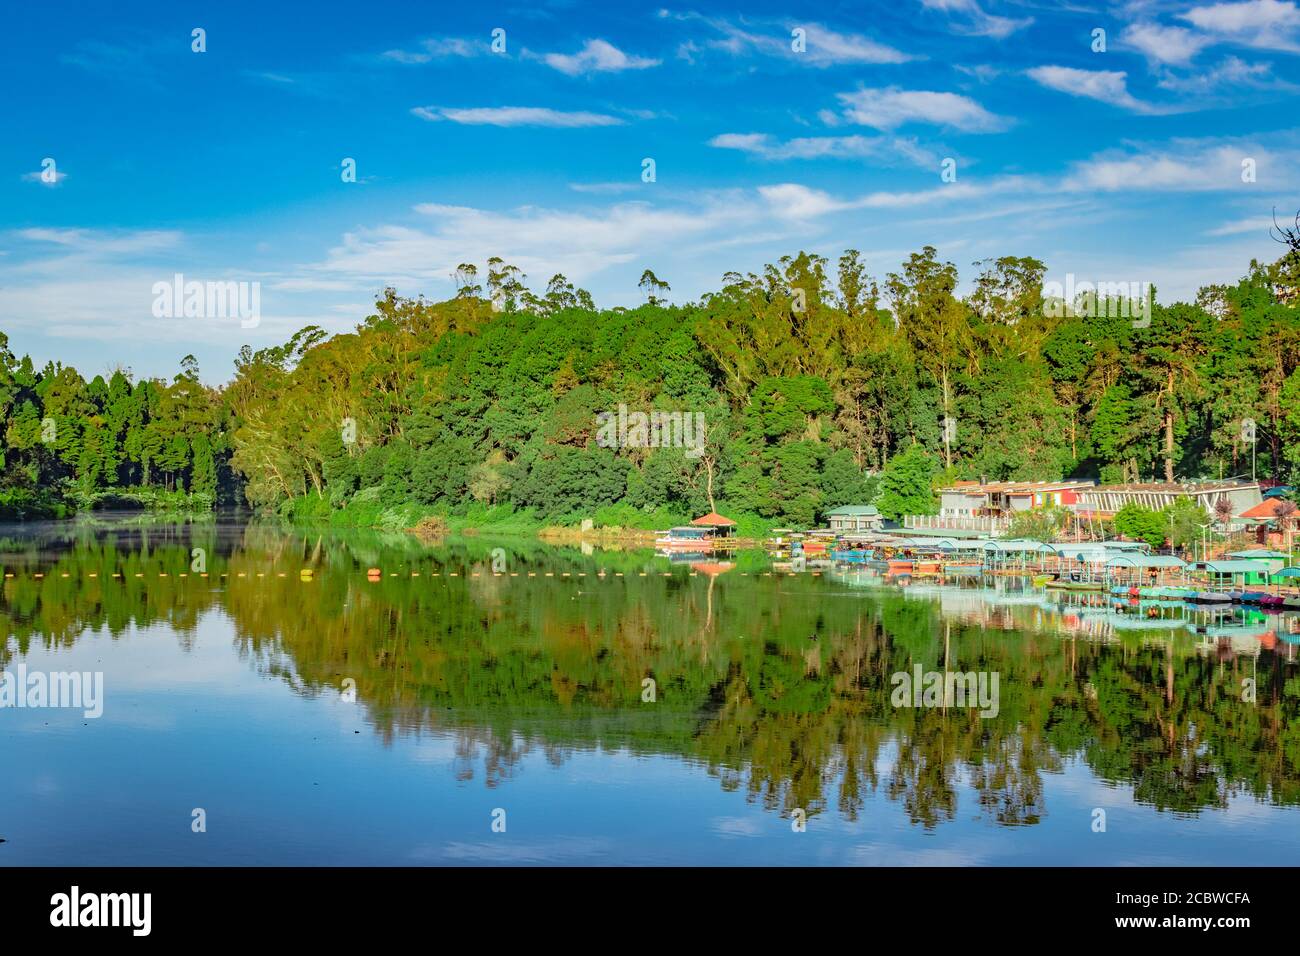 lake pristine with green forest water reflection and bright blue sky at morning image is taken at ooty lake tamilnadu south india. it is showing the b Stock Photo